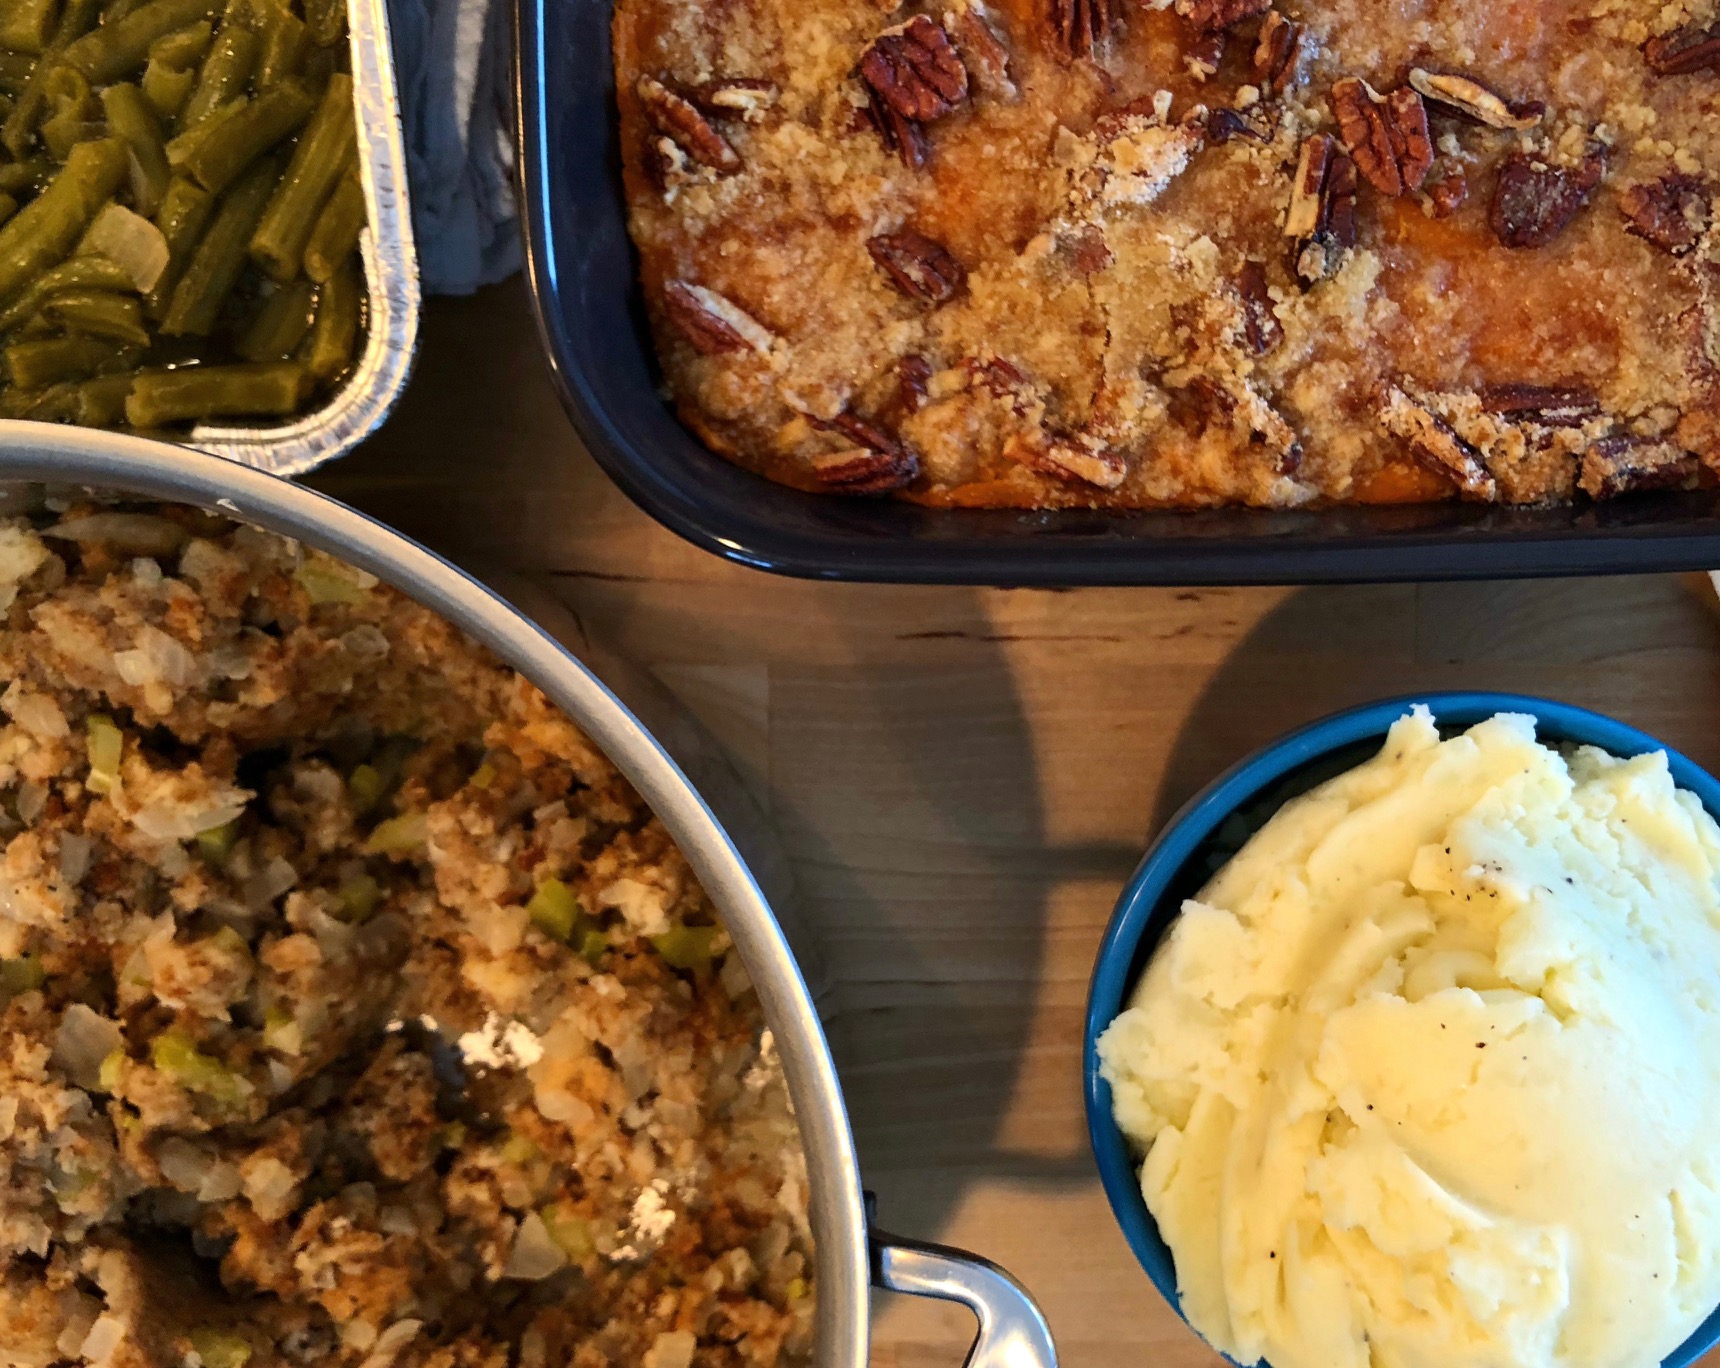 An overhead photo shows four side dishes in each corner. In the top left, green beans, top right, sweet potato casserole, bottom right, mashed potatoes in a blue bowl, and on the bottom right, stuffing in a metal pot. Photo by Alyssa Buckley.